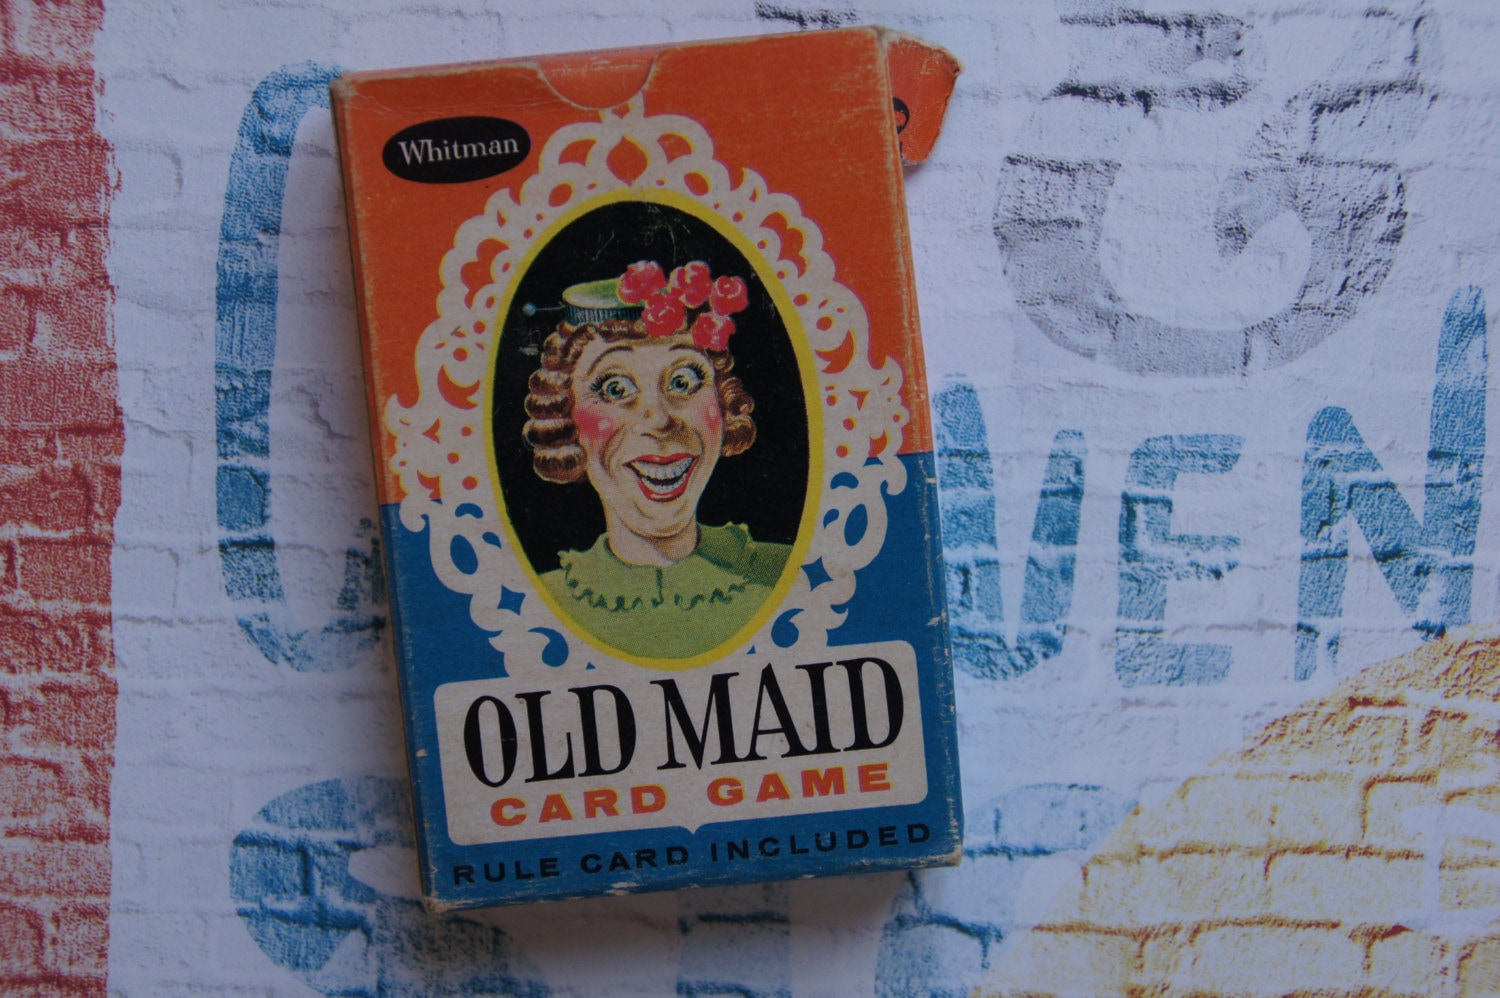 Whitman Old Maid Card Game Complete Deck